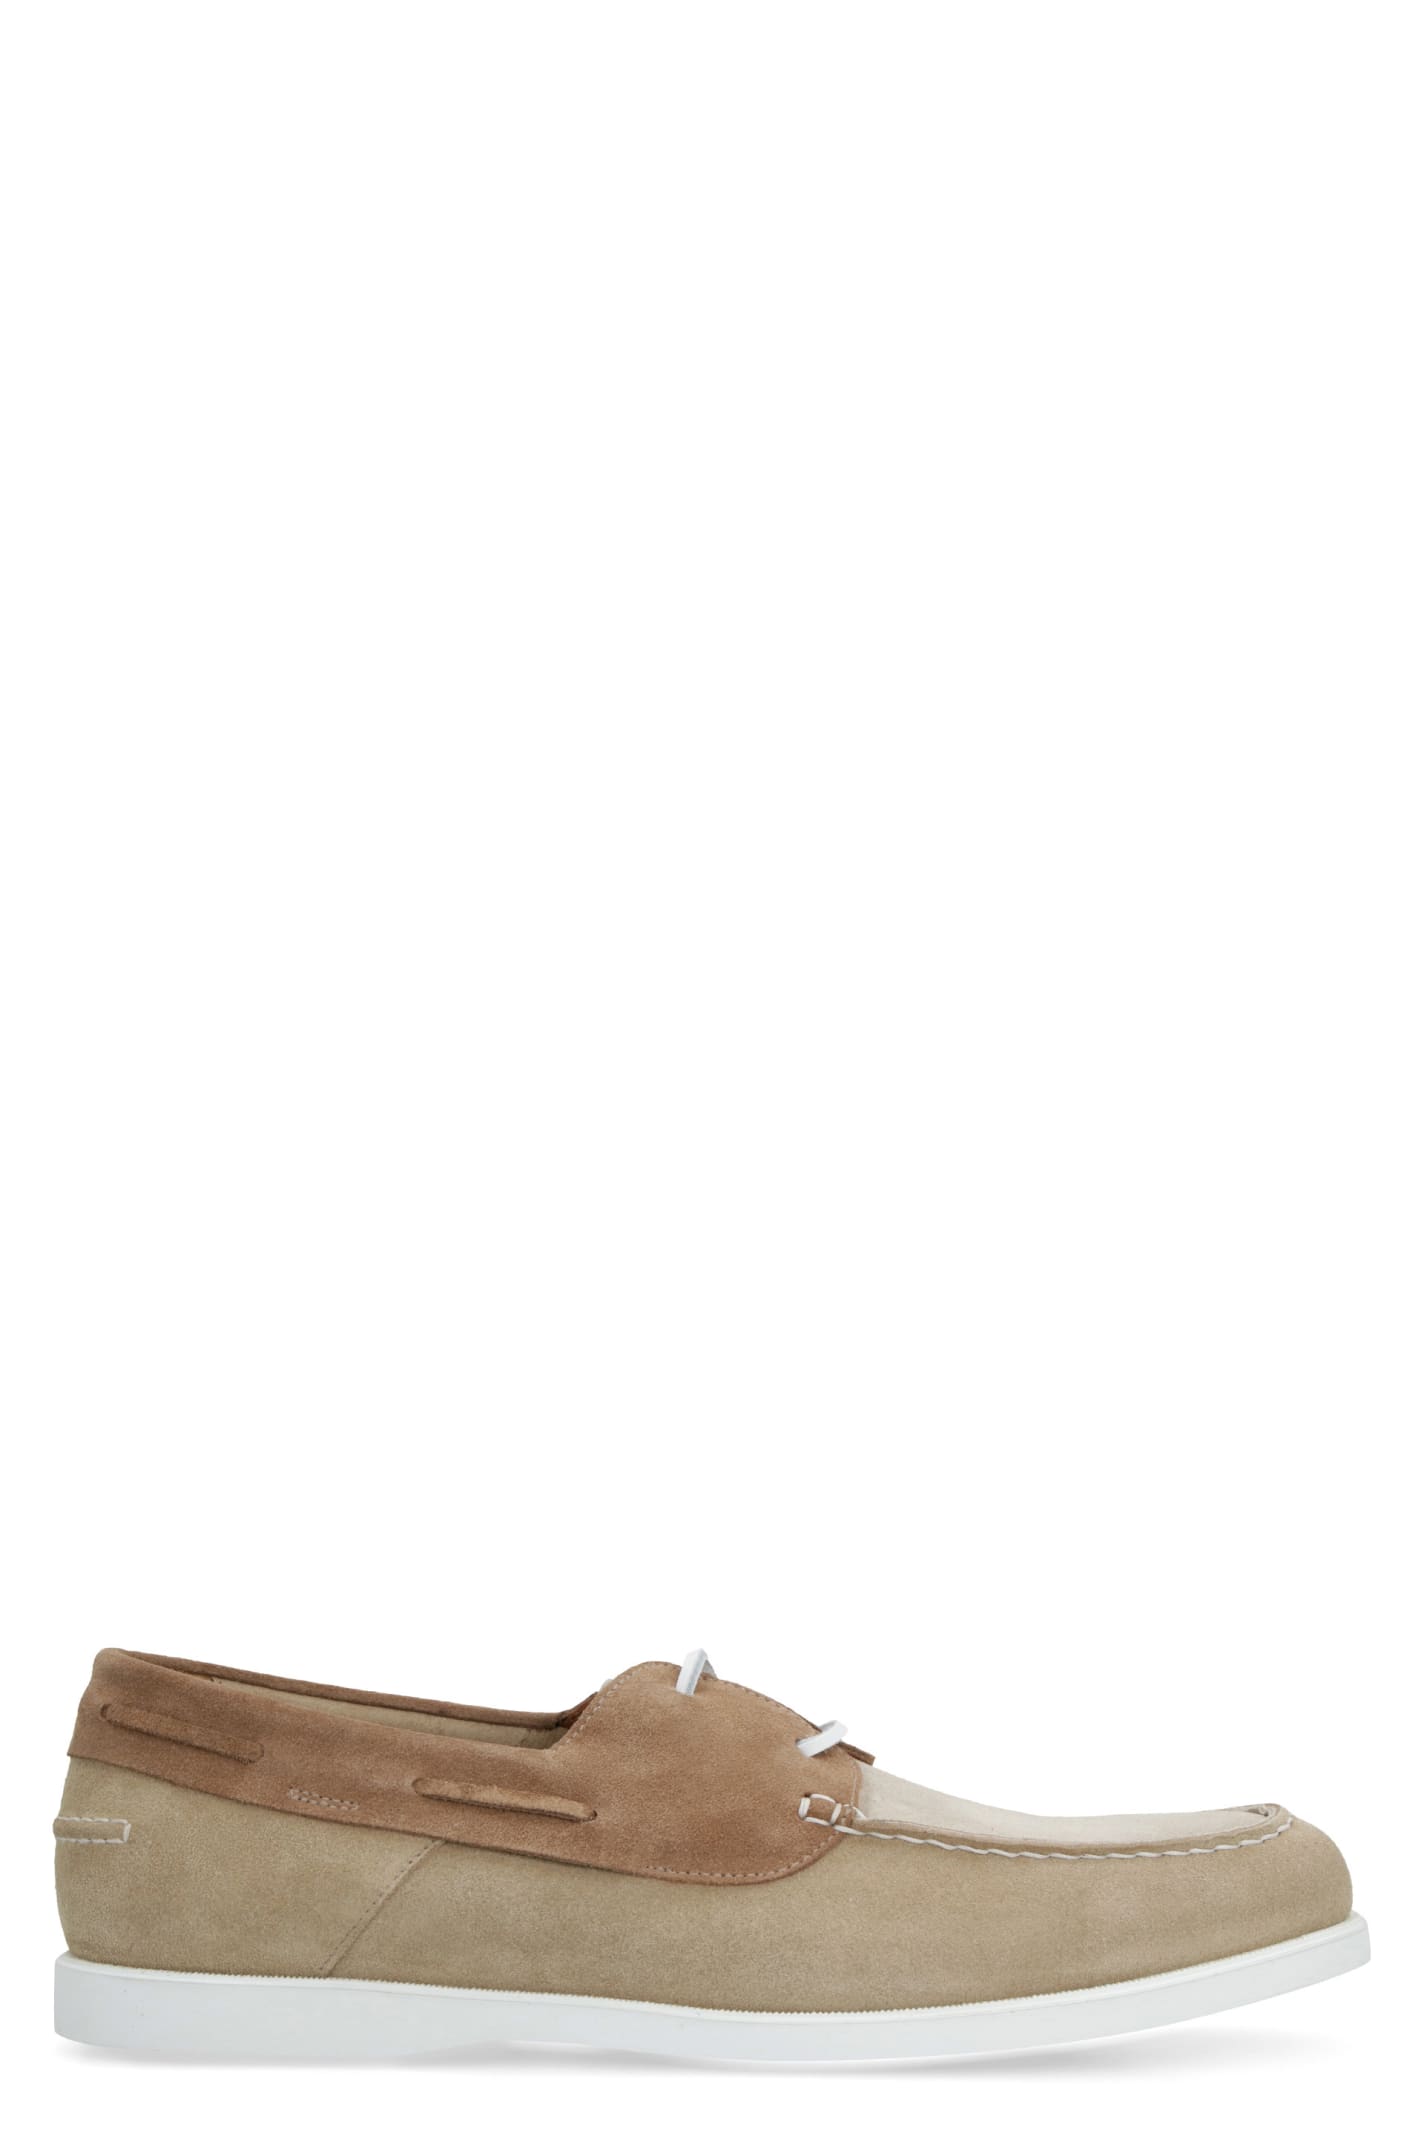 Doucal's Saria Suede Loafers In Beige Sabbia